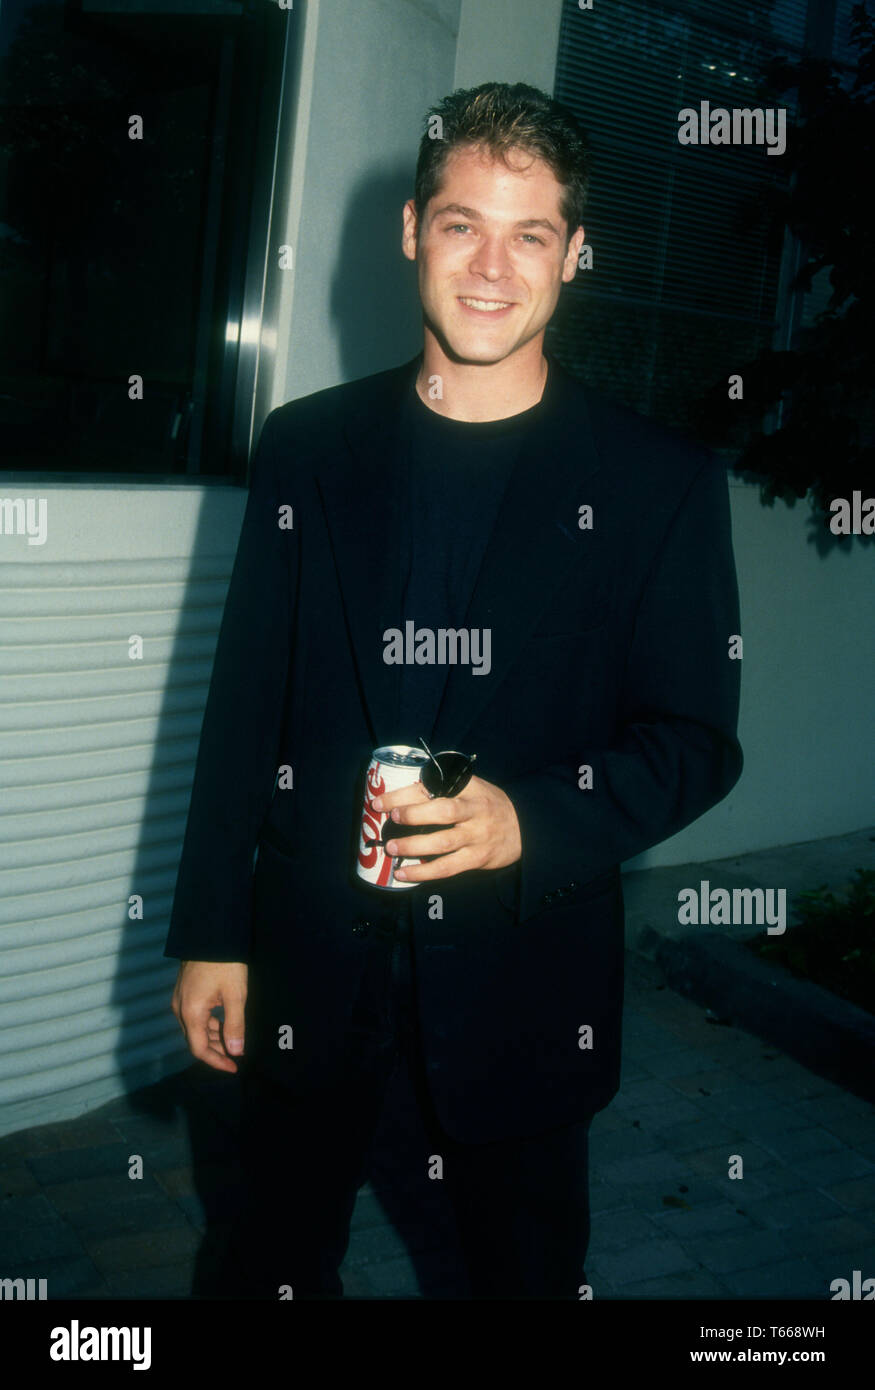 Culver City, California, USA 10th April, 1994  Actor David Barry Gray attends TriStar Pictures 'Cops and Robbersons' Premiere on April 10, 1994 at Sony Studios in Culver City, California, USA. Photo by Barry King/Alamy Stock Photo Stock Photo